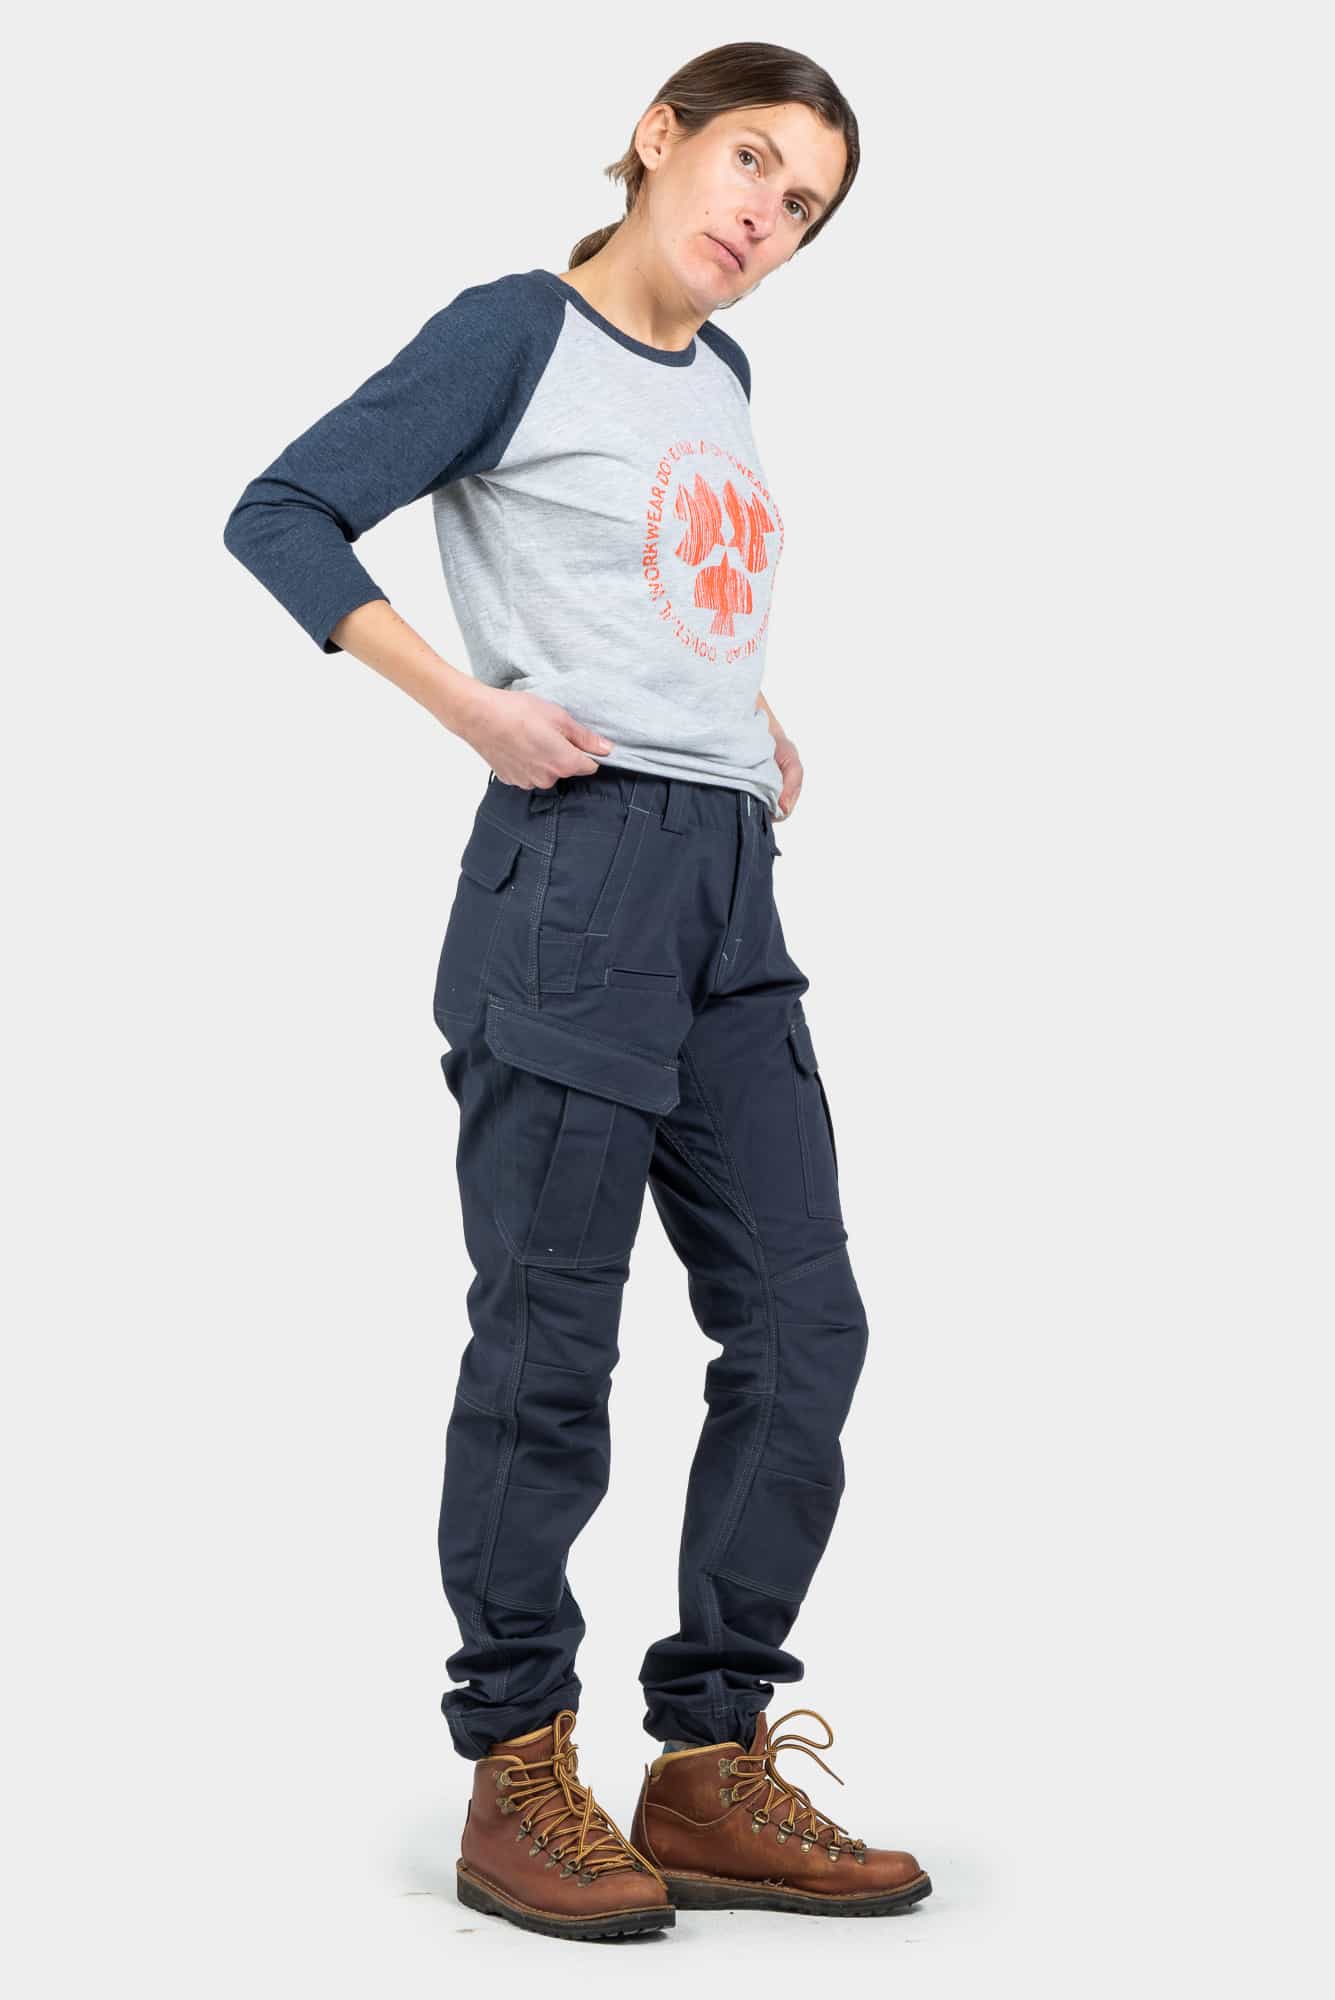  Women Cargo Pants With Pockets